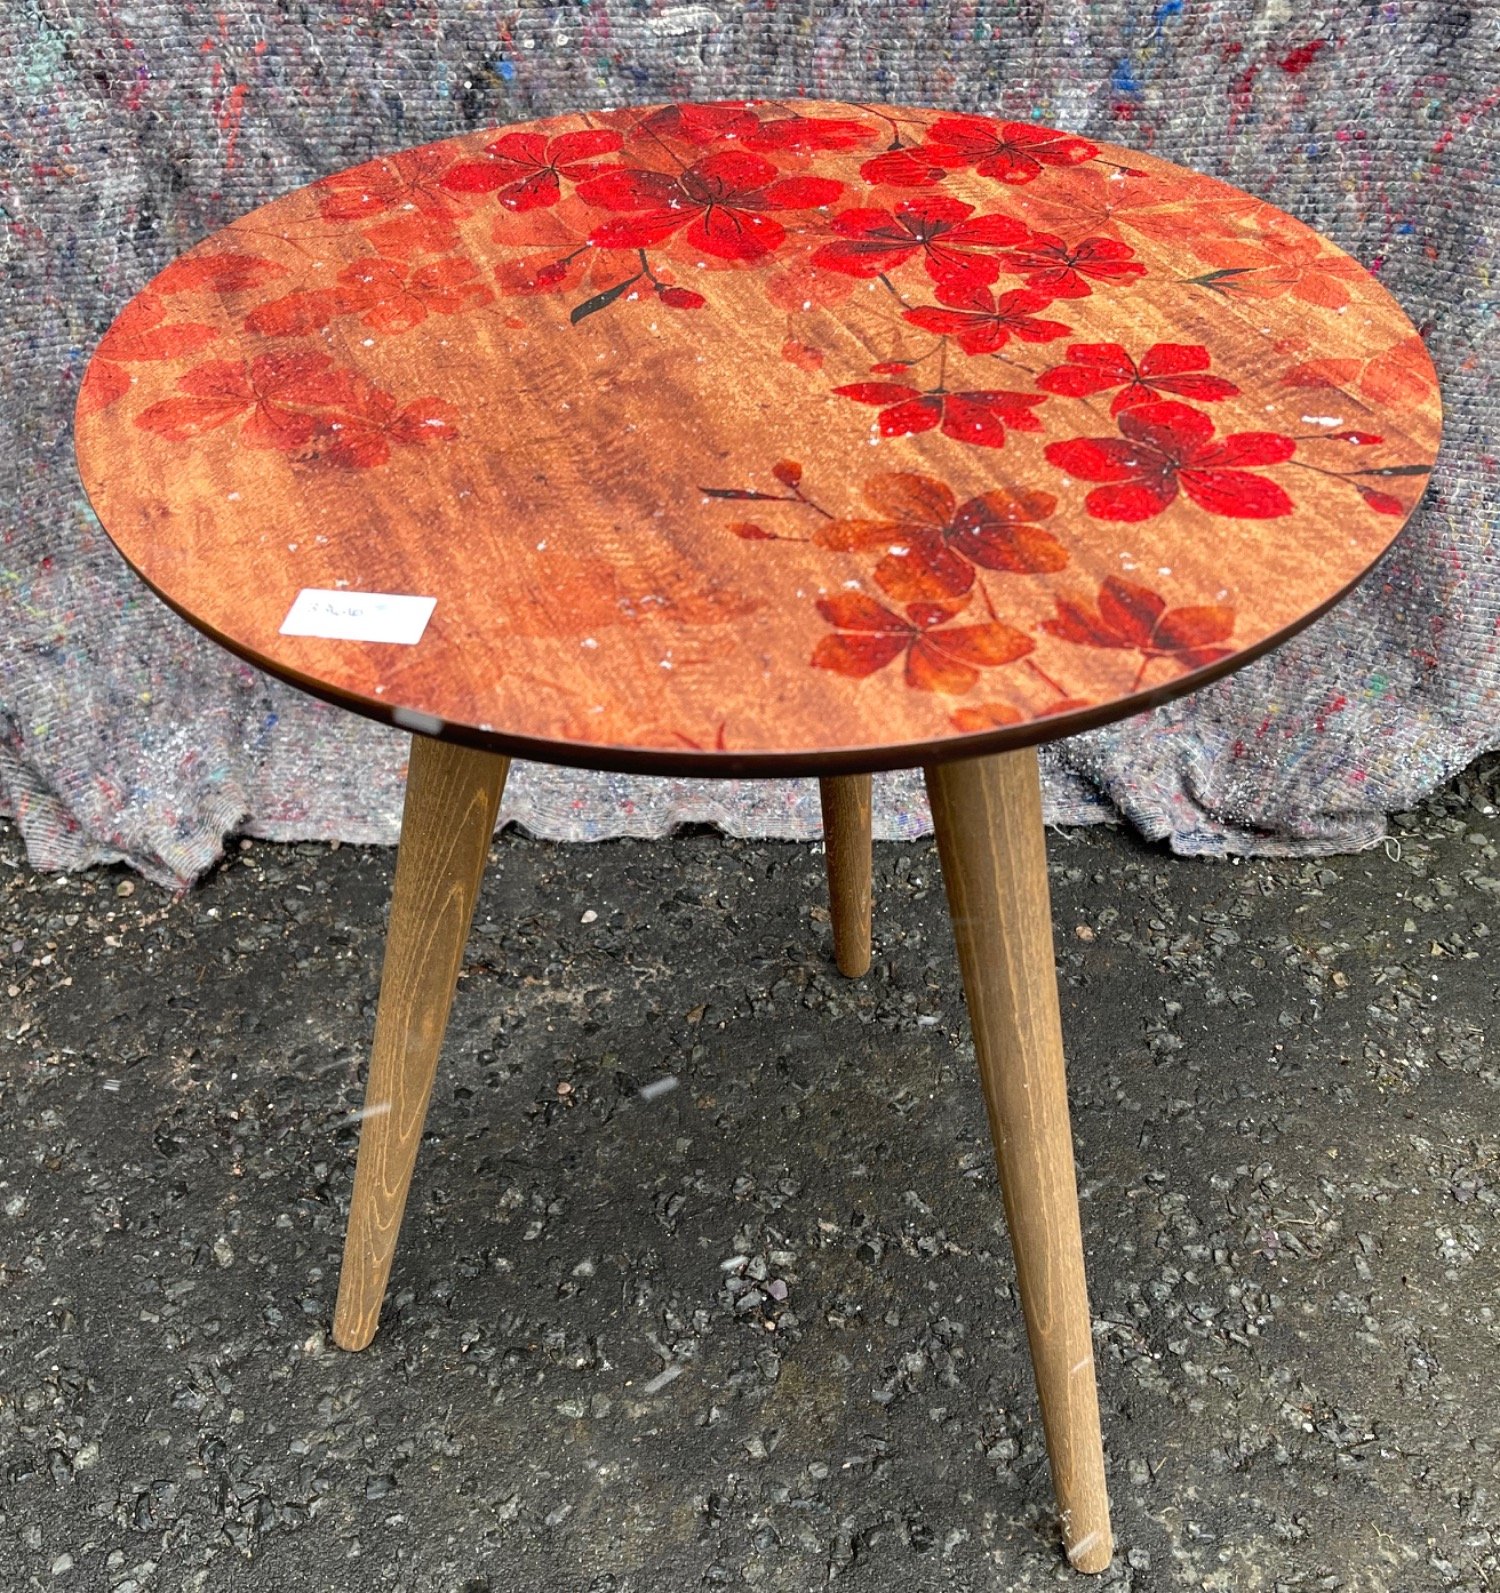 A joiner-made wooden round coffee table with an UNUSUAL LEG-support combination! - dimensions